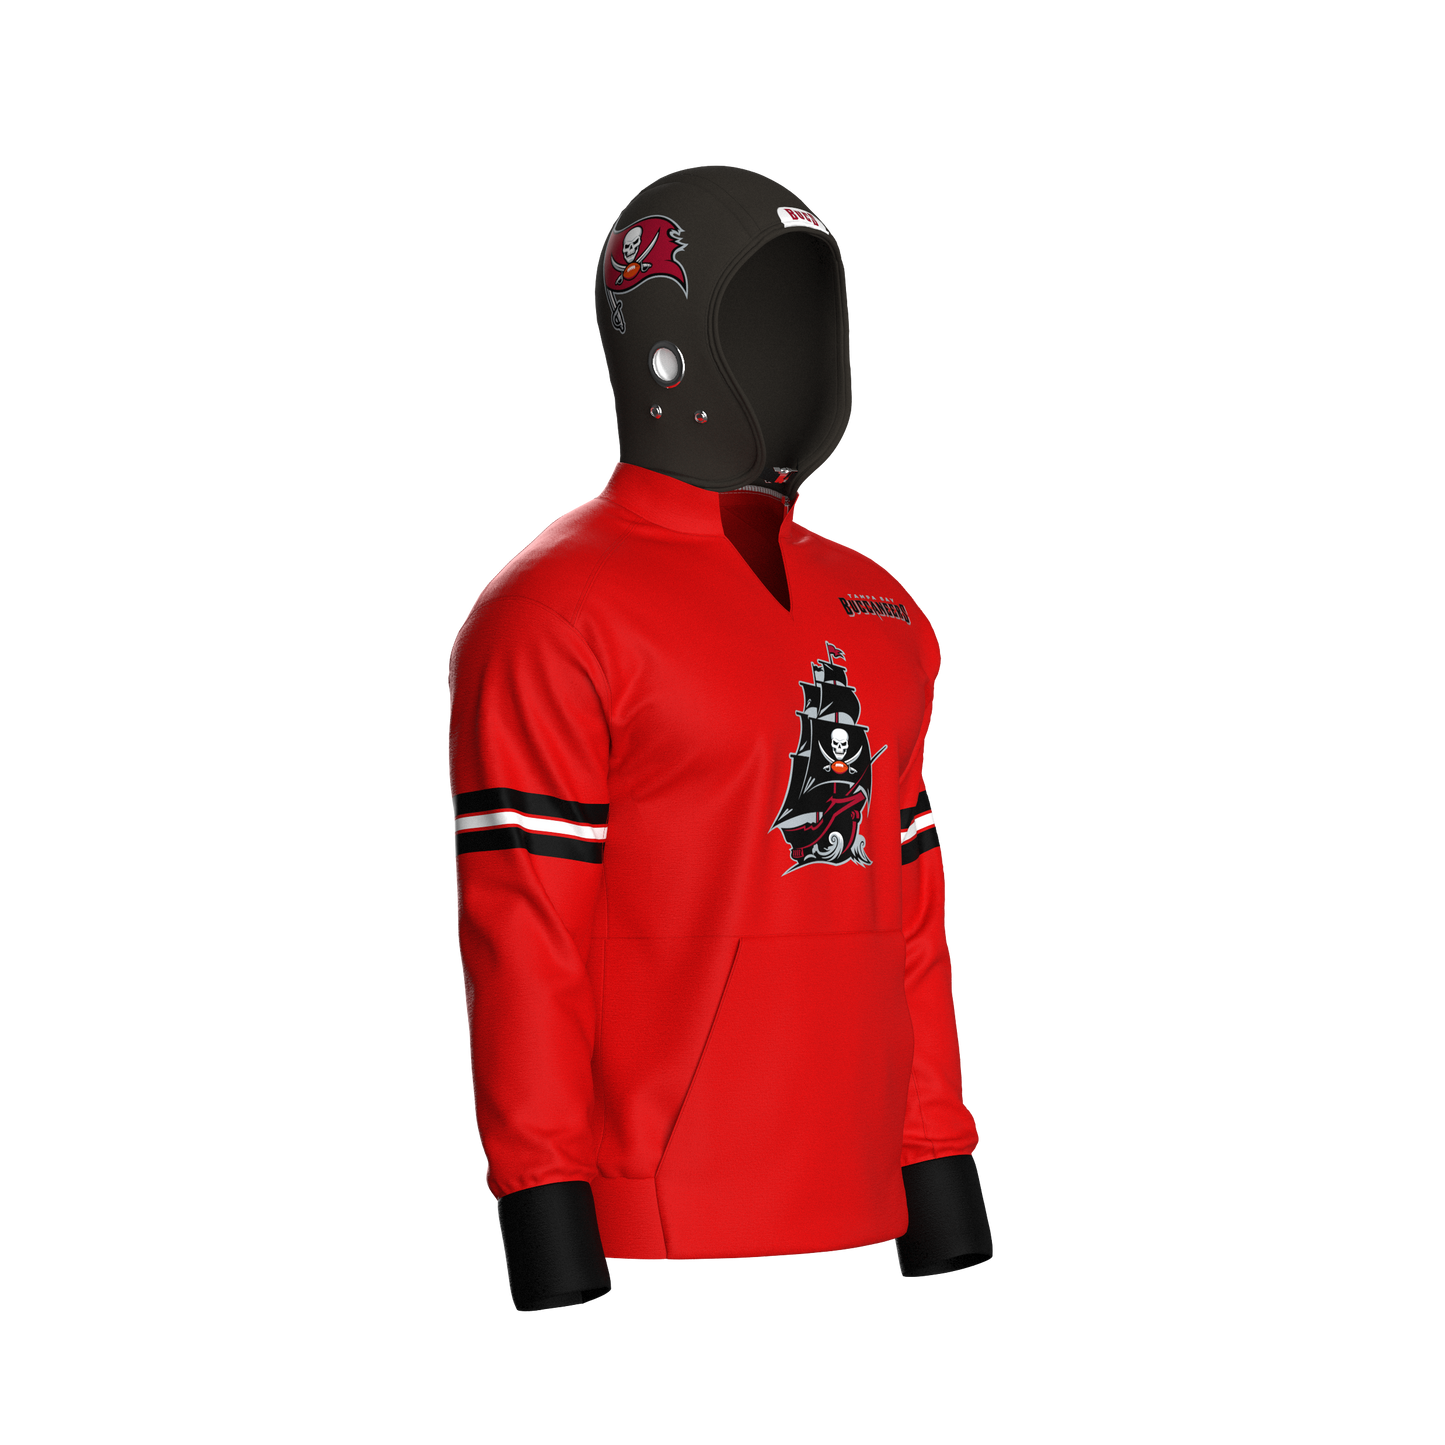 Tampa Bay Buccaneers Home Pullover (youth)